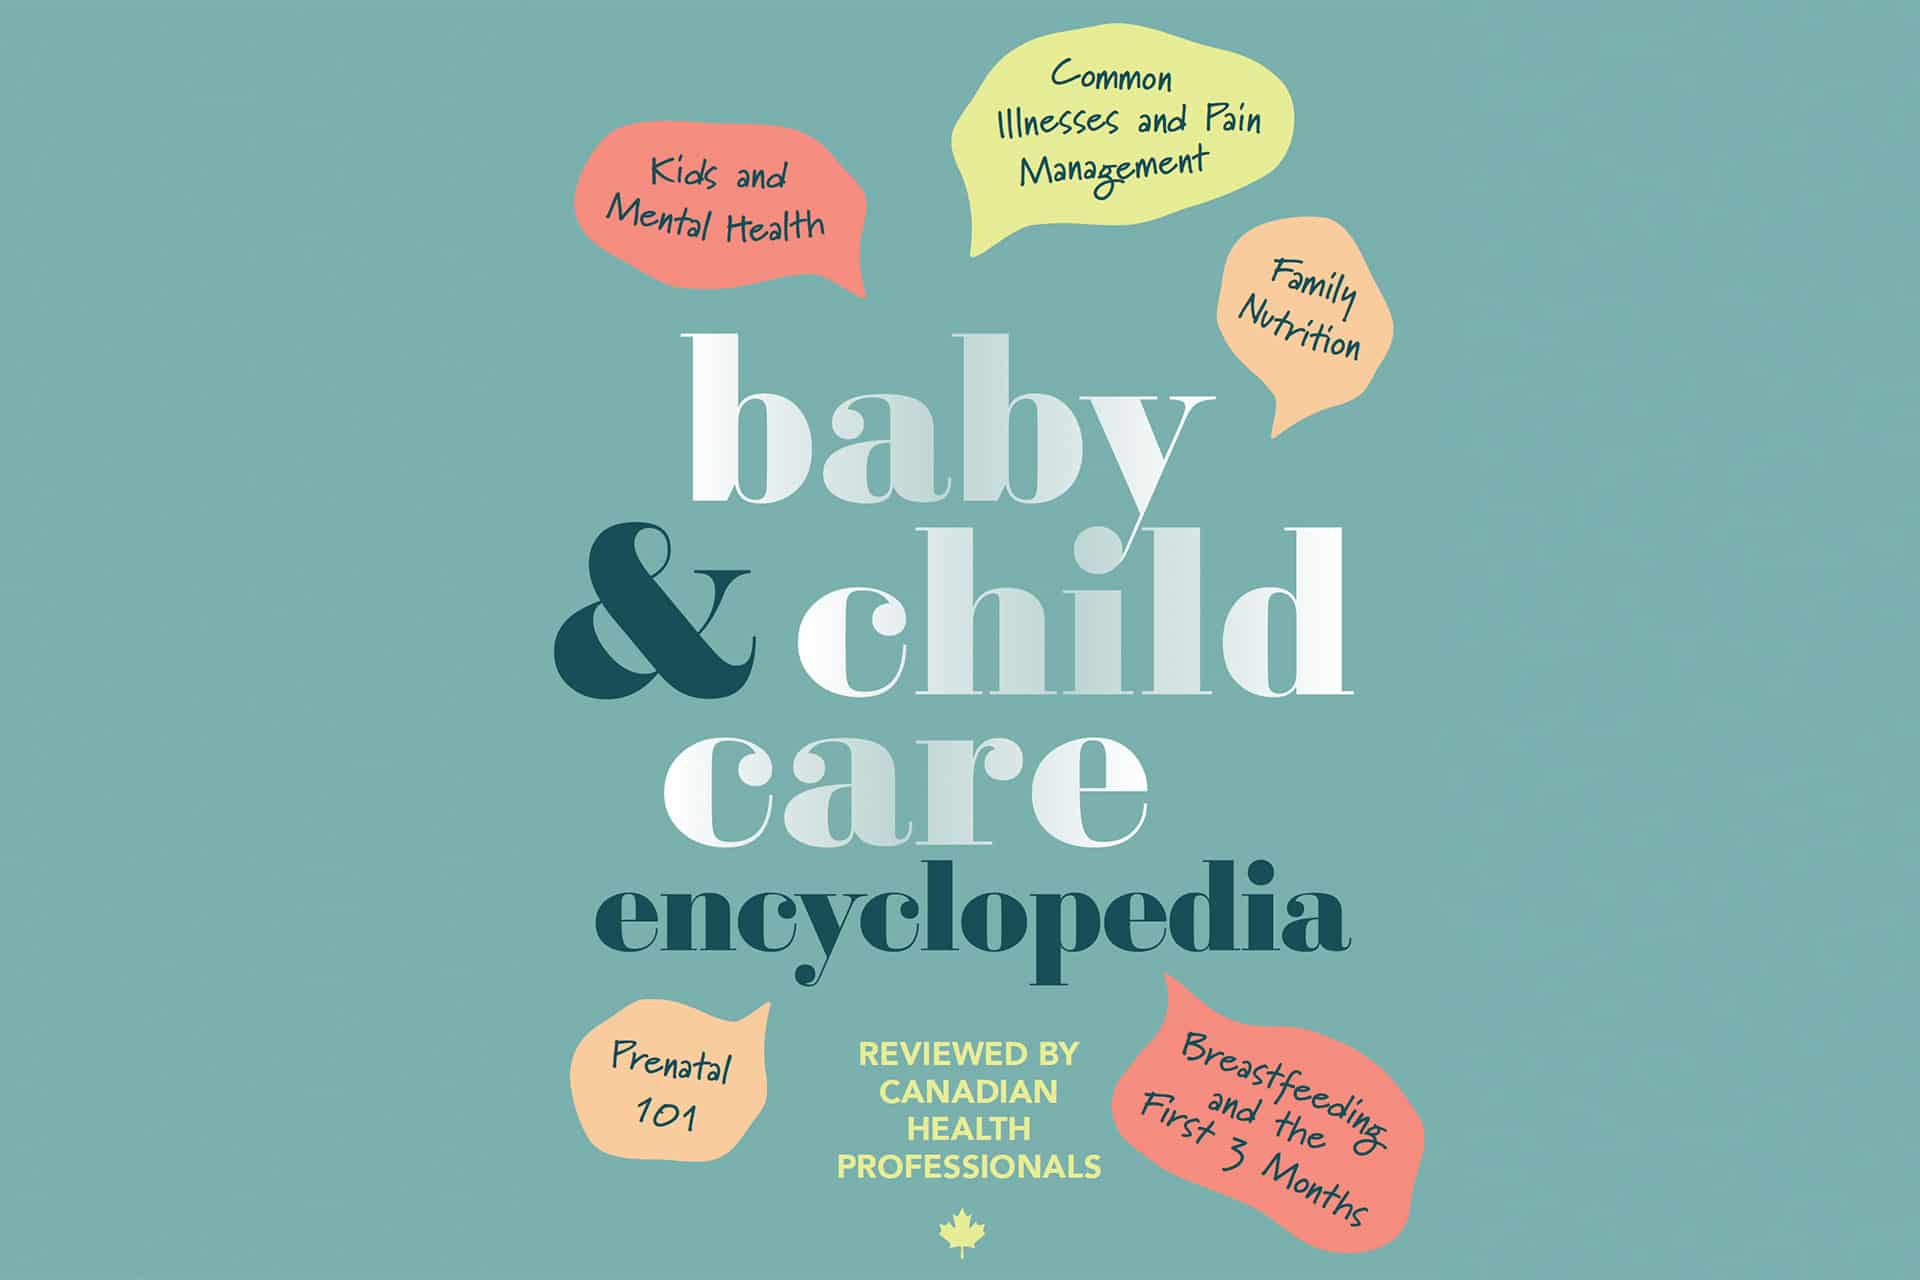 Bcce cover 2021 - baby & child care encyclopedia